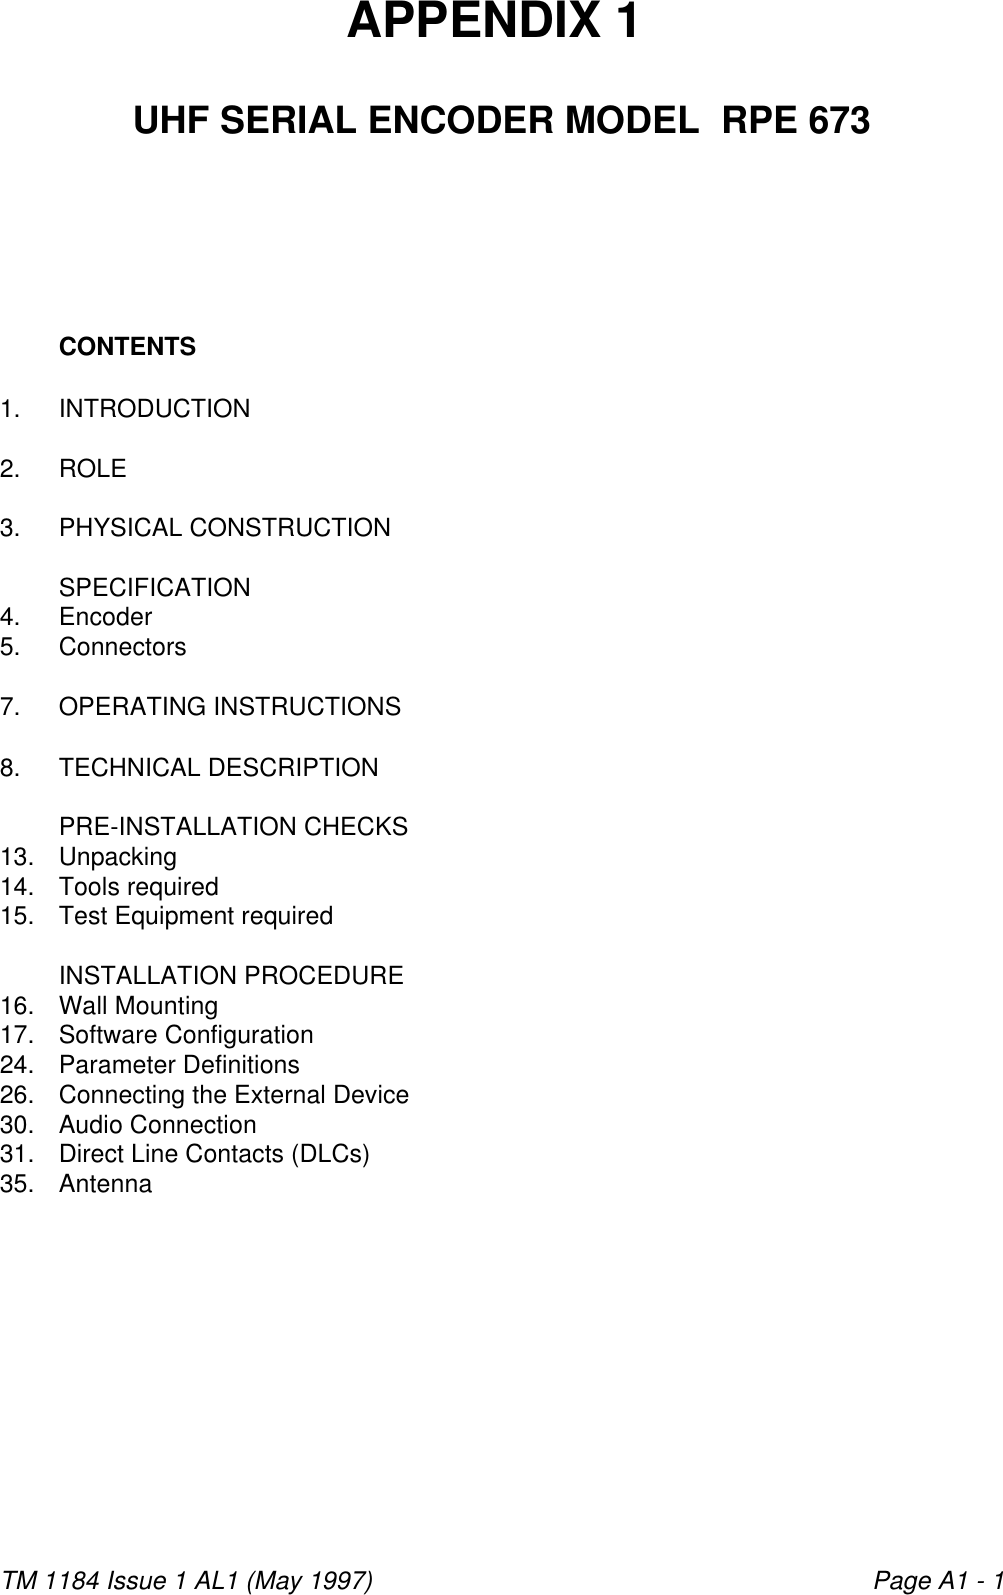 TM 1184 Issue 1 AL1 (May 1997) Page A1 - 1                                                            APPENDIX 1 UHF SERIAL ENCODER MODEL  RPE 673CONTENTS1. INTRODUCTION2. ROLE3. PHYSICAL CONSTRUCTIONSPECIFICATION4. Encoder5. Connectors7. OPERATING INSTRUCTIONS8. TECHNICAL DESCRIPTIONPRE-INSTALLATION CHECKS13. Unpacking14. Tools required15. Test Equipment requiredINSTALLATION PROCEDURE16. Wall Mounting17. Software Configuration24. Parameter Definitions26. Connecting the External Device30. Audio Connection31. Direct Line Contacts (DLCs)35. Antenna